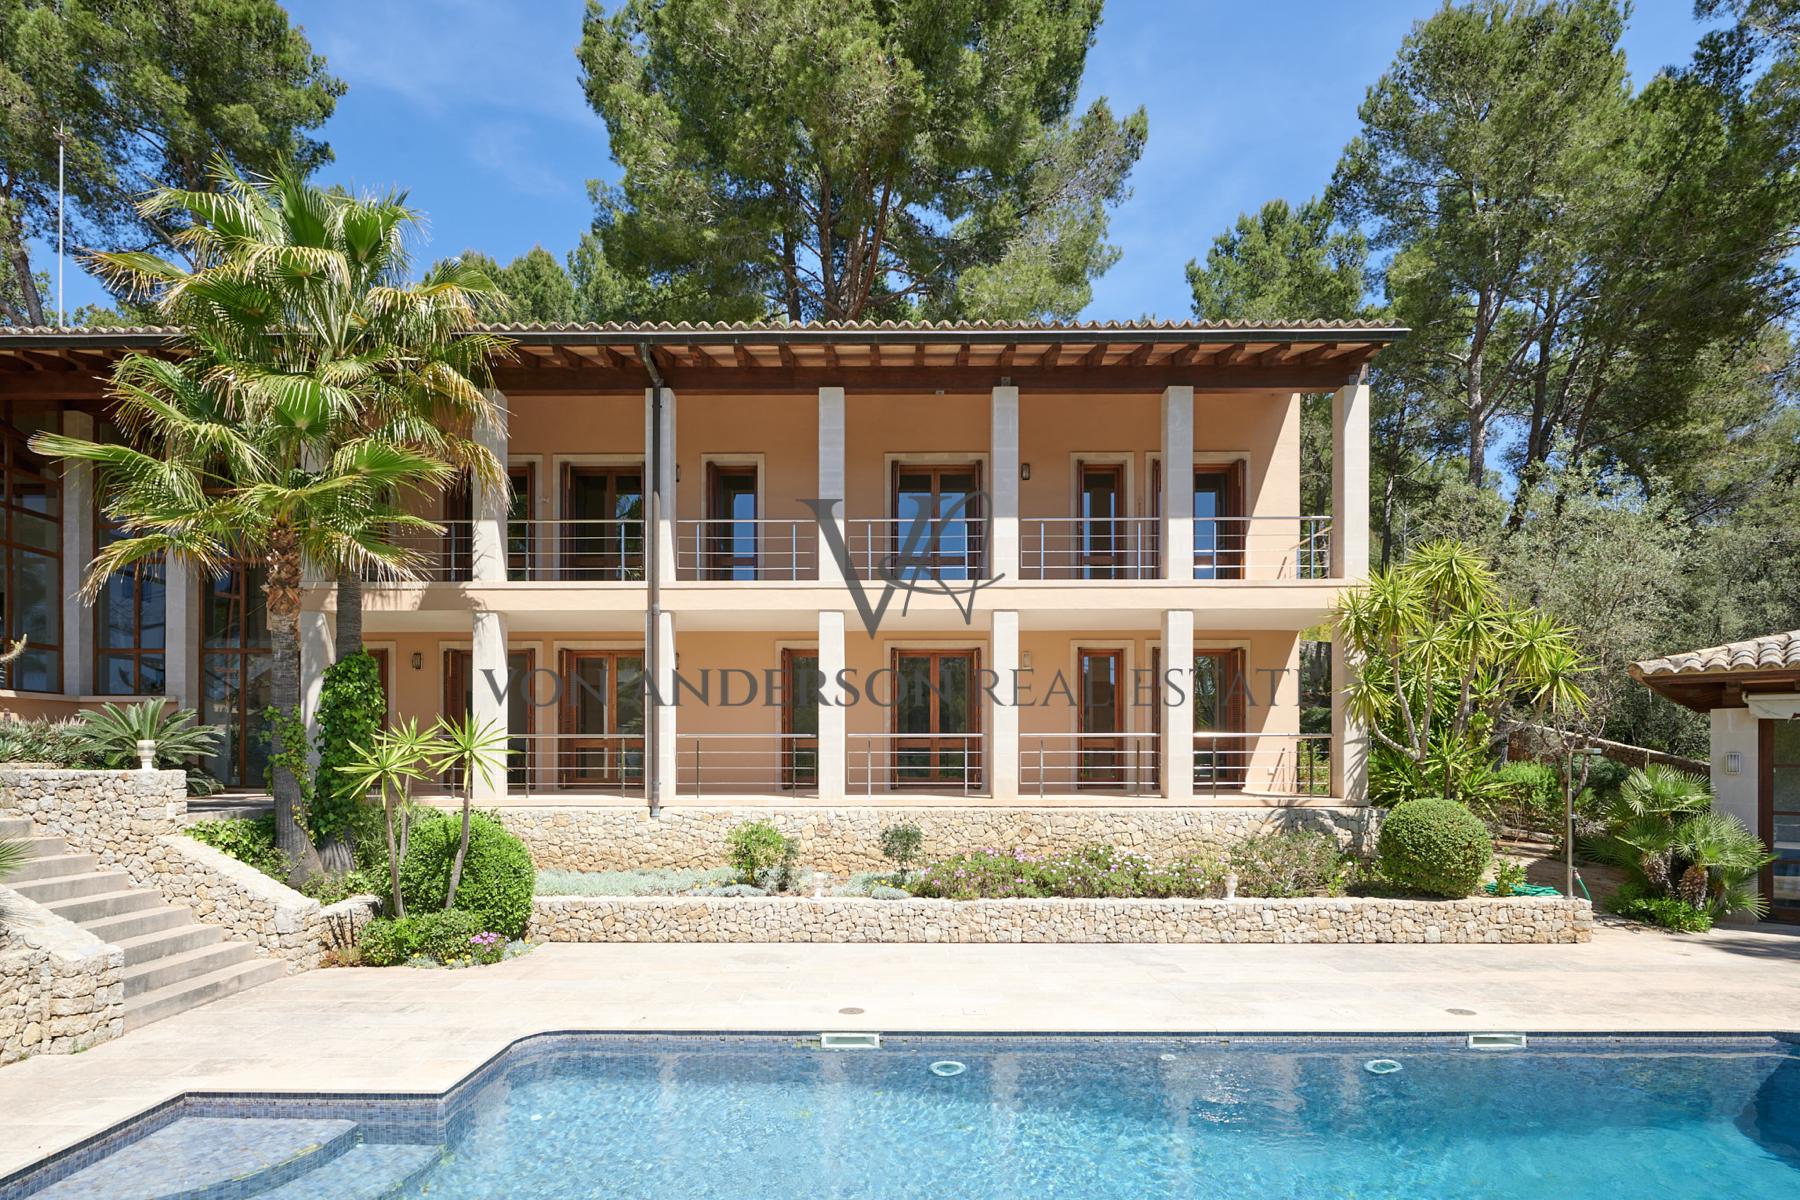 Stunning Opulent Villa with Additional Growth Opportunities in Son Vida near Palma, ref. VA1025, for sale in Mallorca with Von Anderson Real Estate